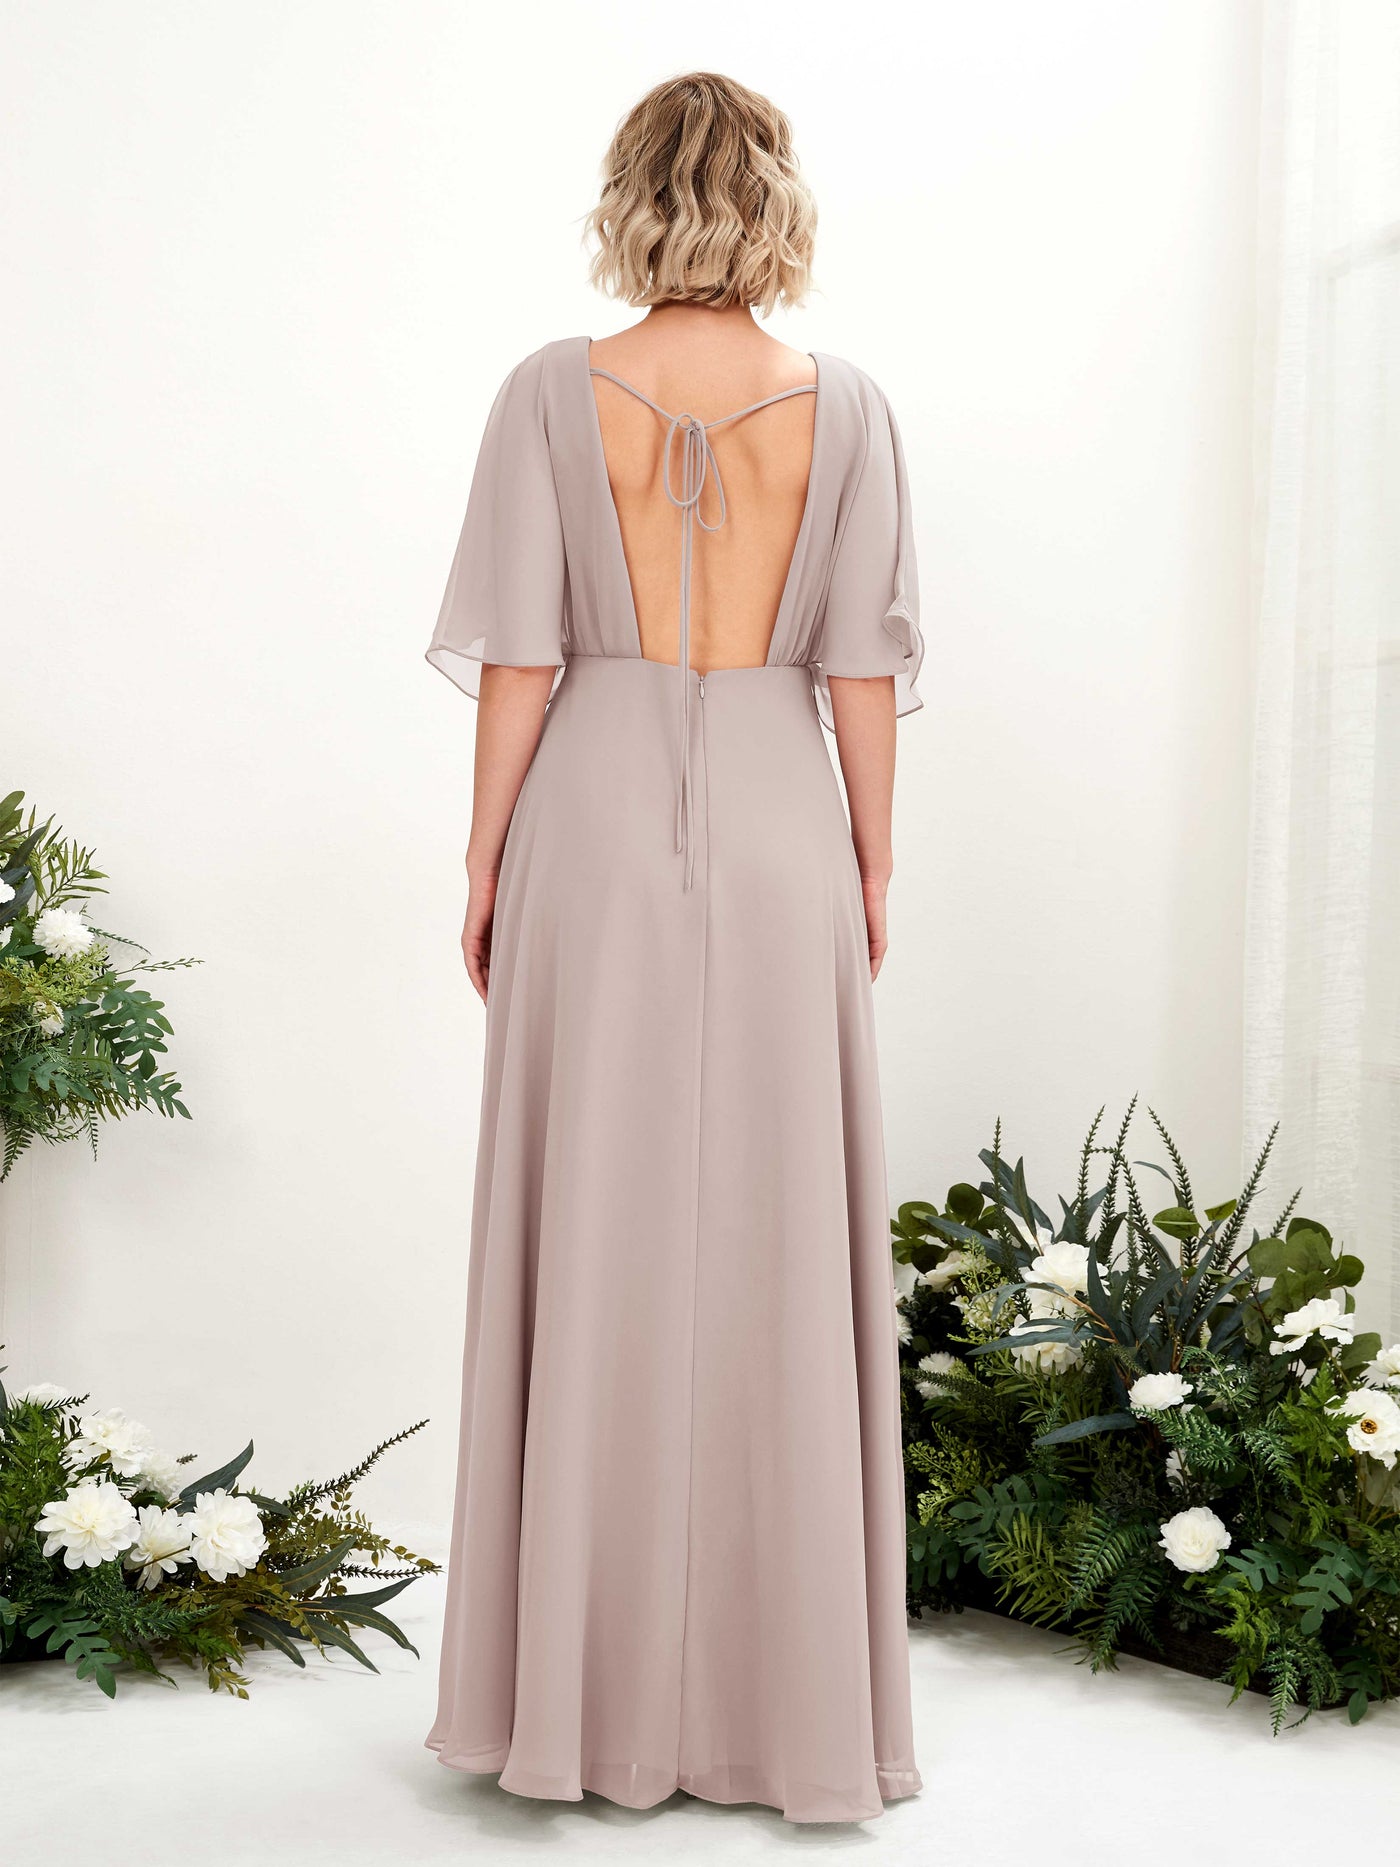 Taupe Bridesmaid Dresses Bridesmaid Dress A-line Chiffon V-neck Full Length Short Sleeves Wedding Party Dress (81225124)#color_taupe